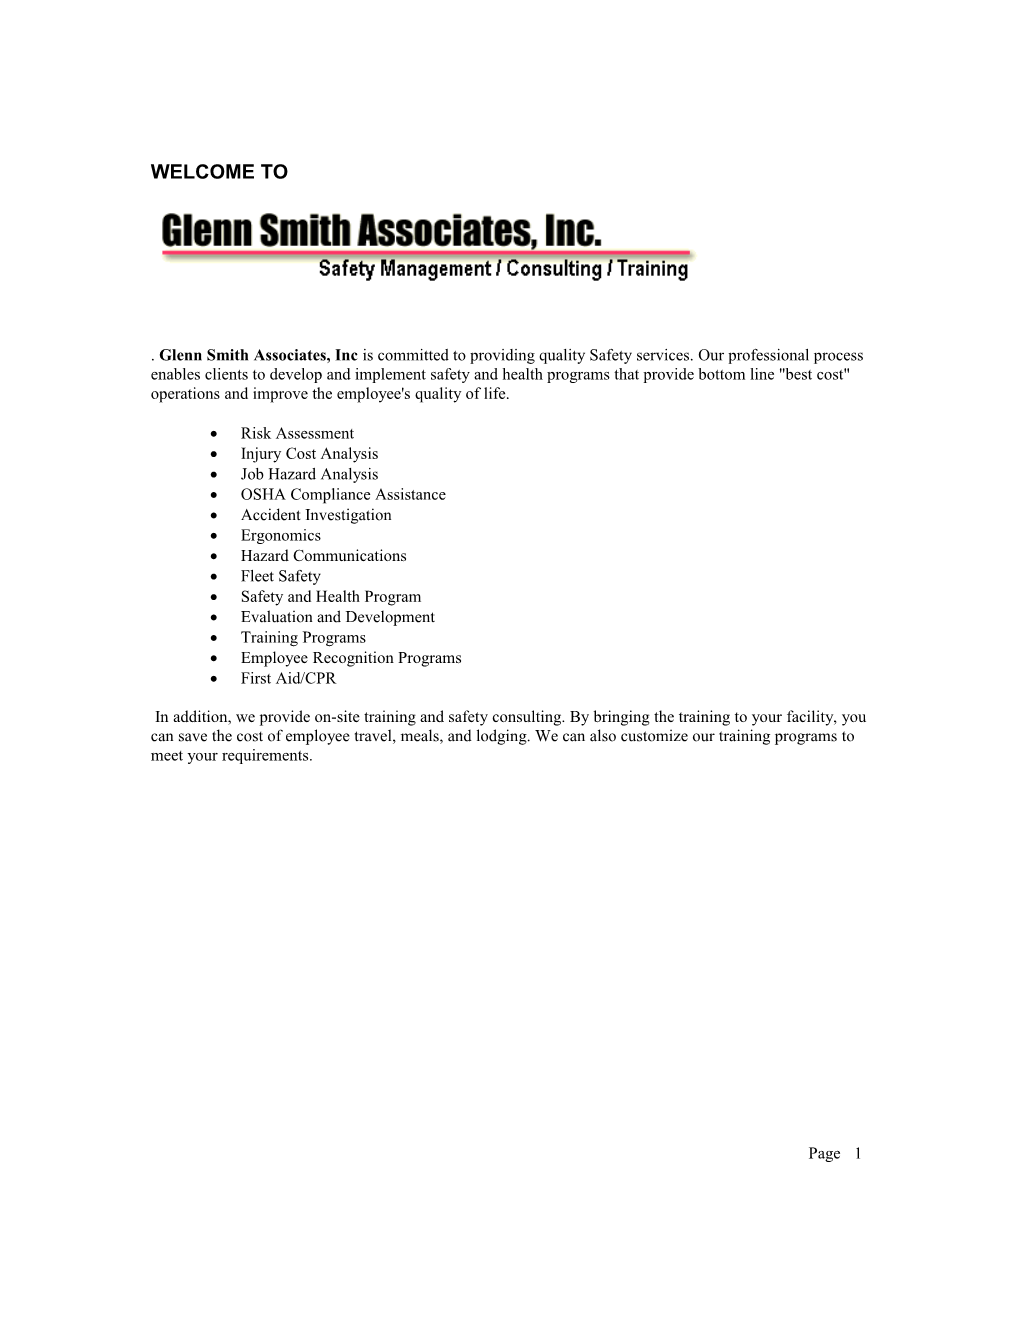 Glenn Smith Associates, Inc Is Committed to Providing Quality Safety Services. Our